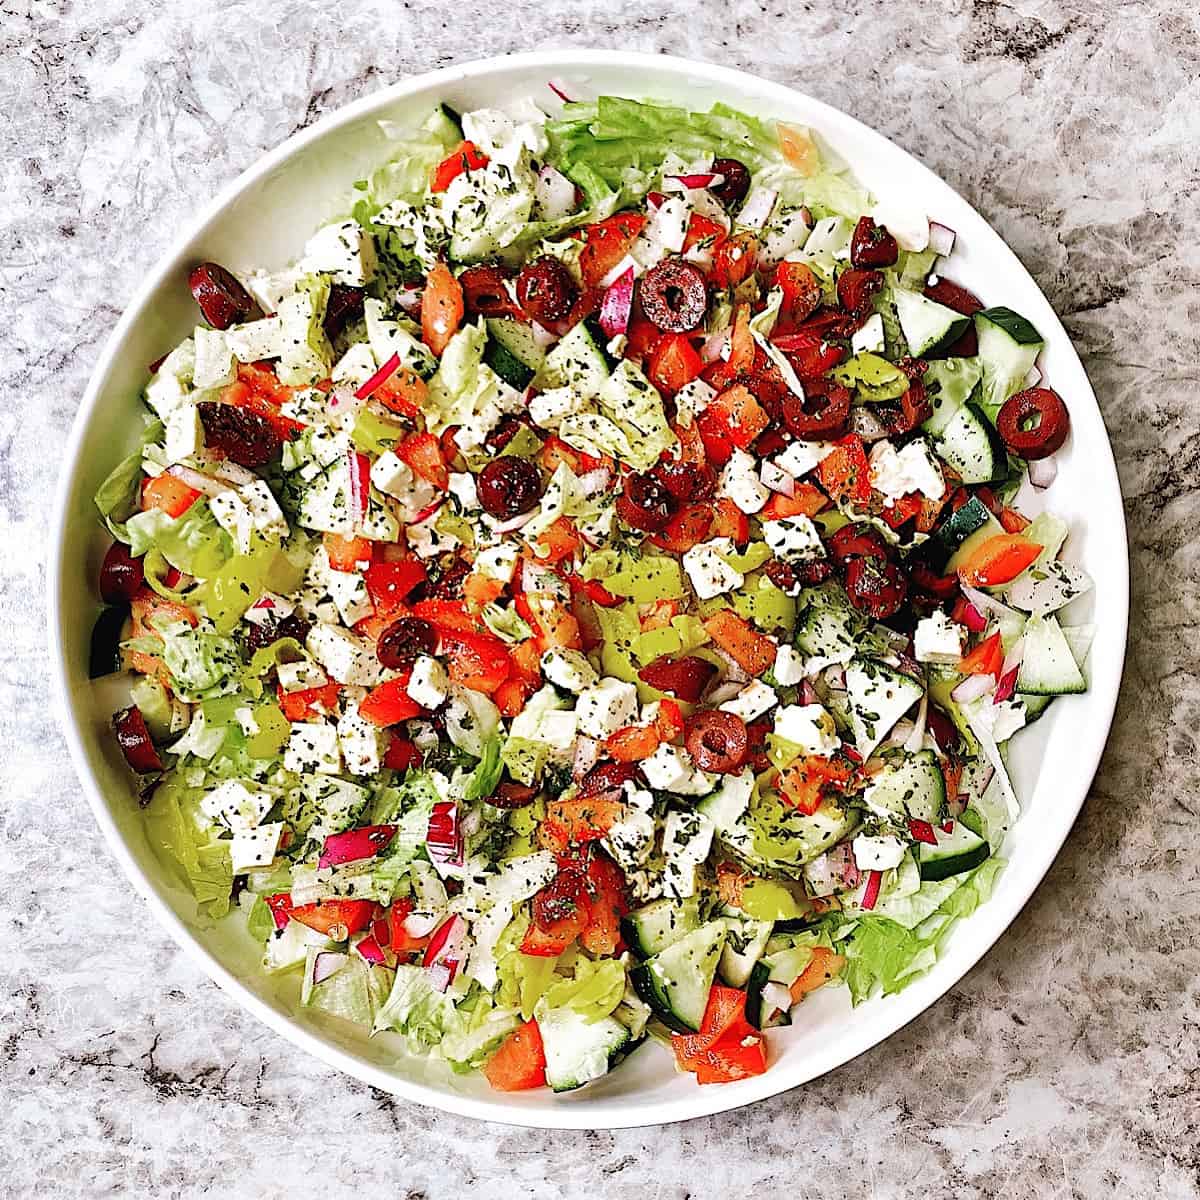 A large white bowl filled with chopped salad that includes feta, tomatoes, greek olives, greek peppers, cucumber, and oregano sprinkled on top.